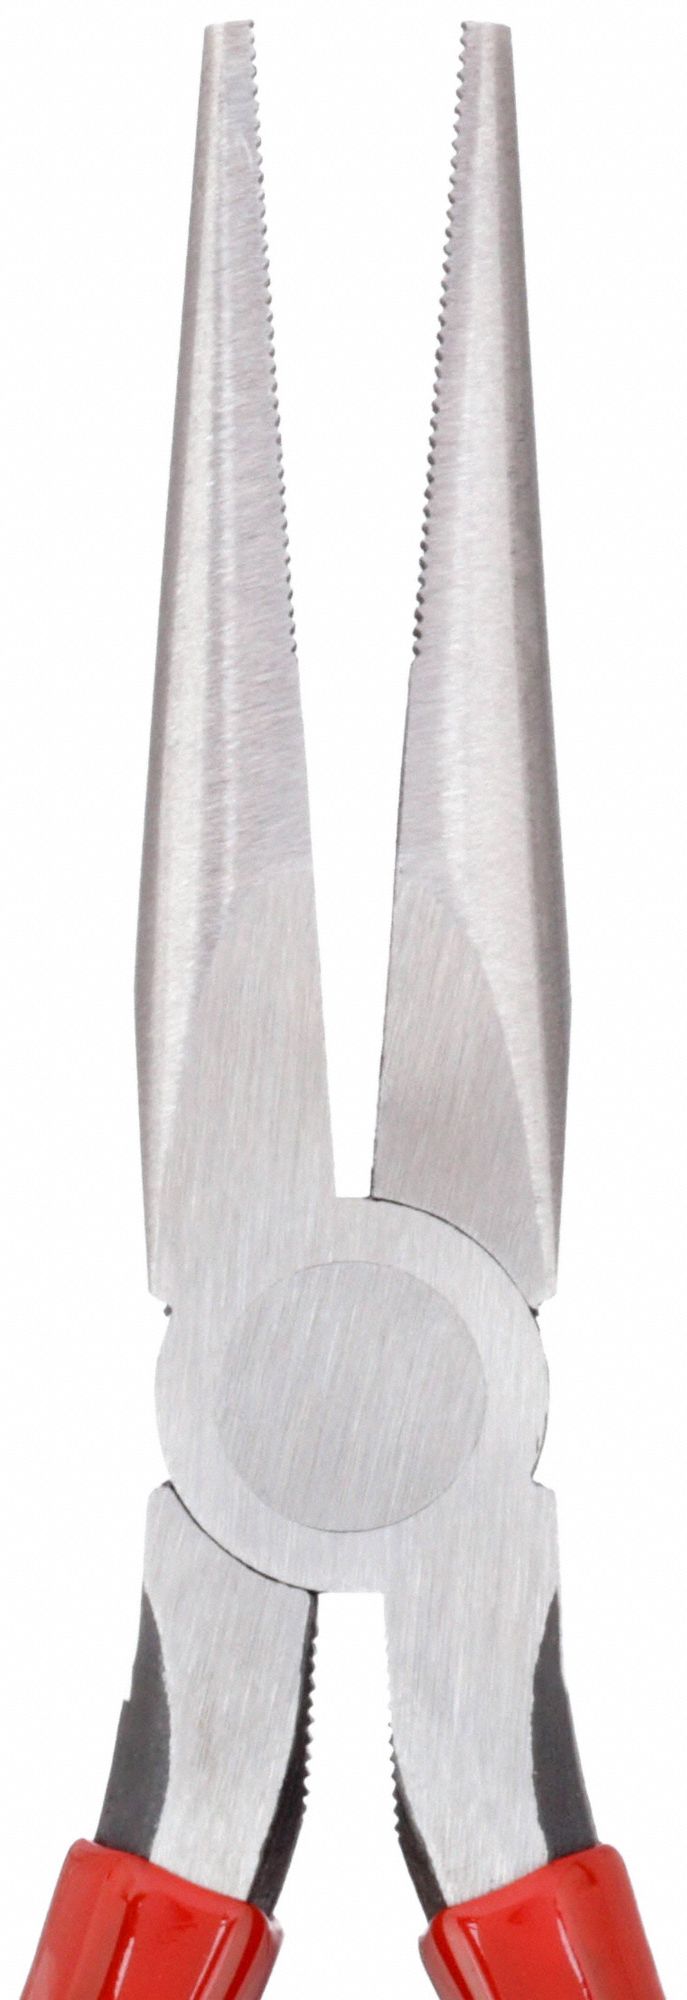 NEEDLE NOSE PLIER: 1 1/4 IN MAX JAW OPENING, 8 1/2 IN (TDY020889)  92644710285